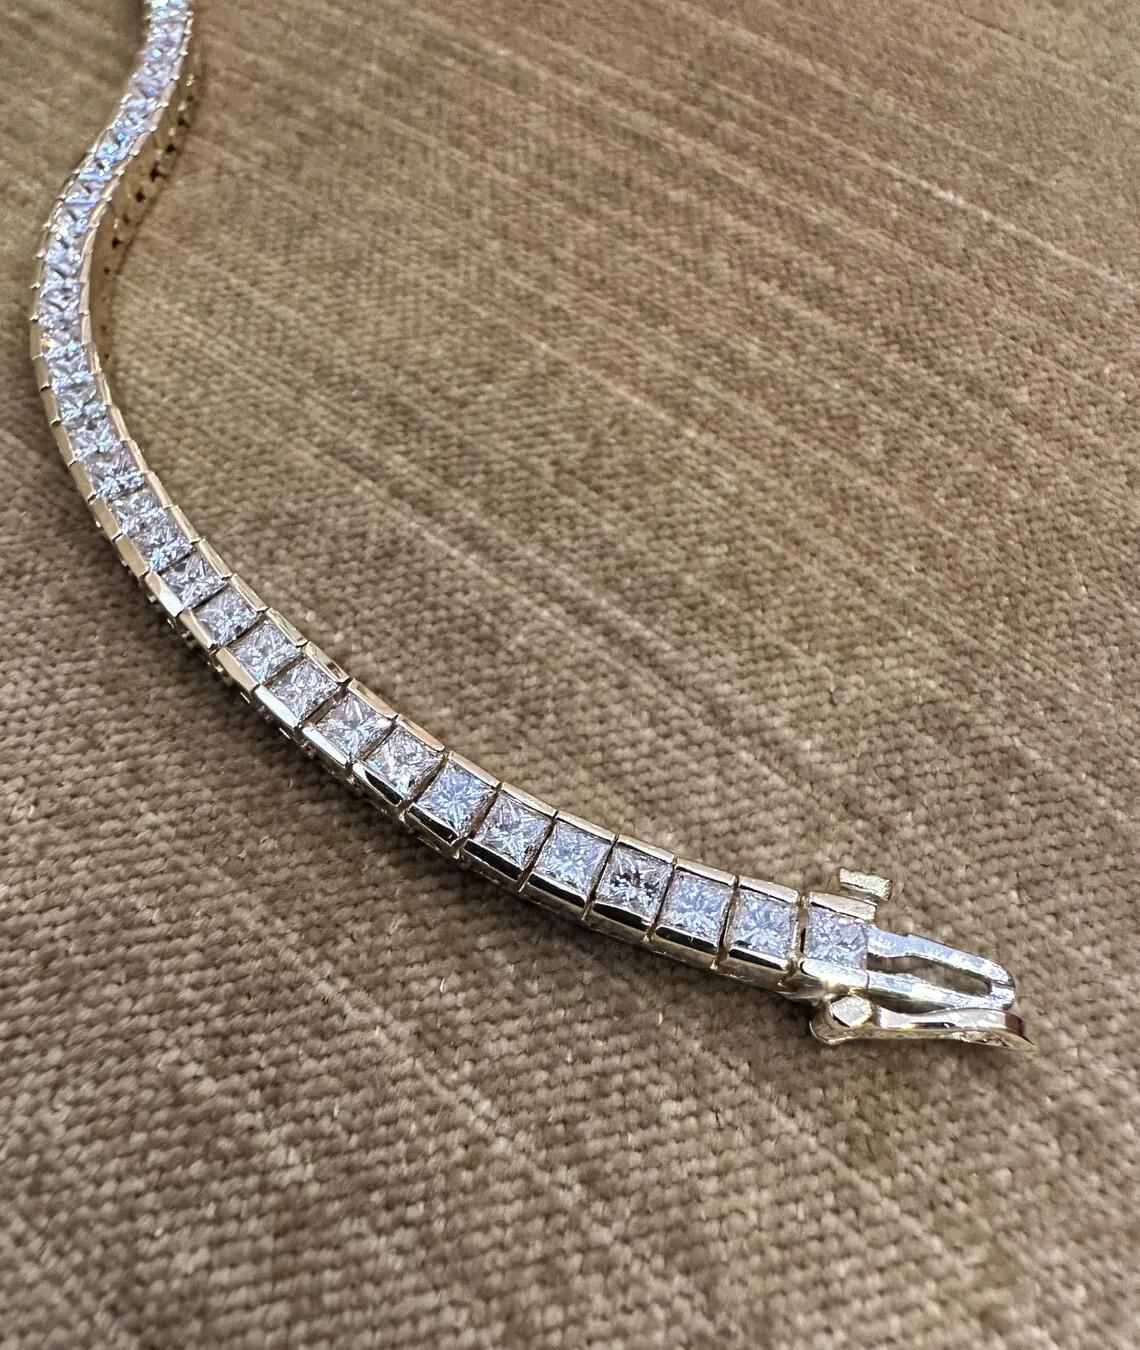 Princess Cut Diamond Tennis Bracelet 7.50 Carat Total Weight in 18k Yellow Gold In Excellent Condition For Sale In La Jolla, CA